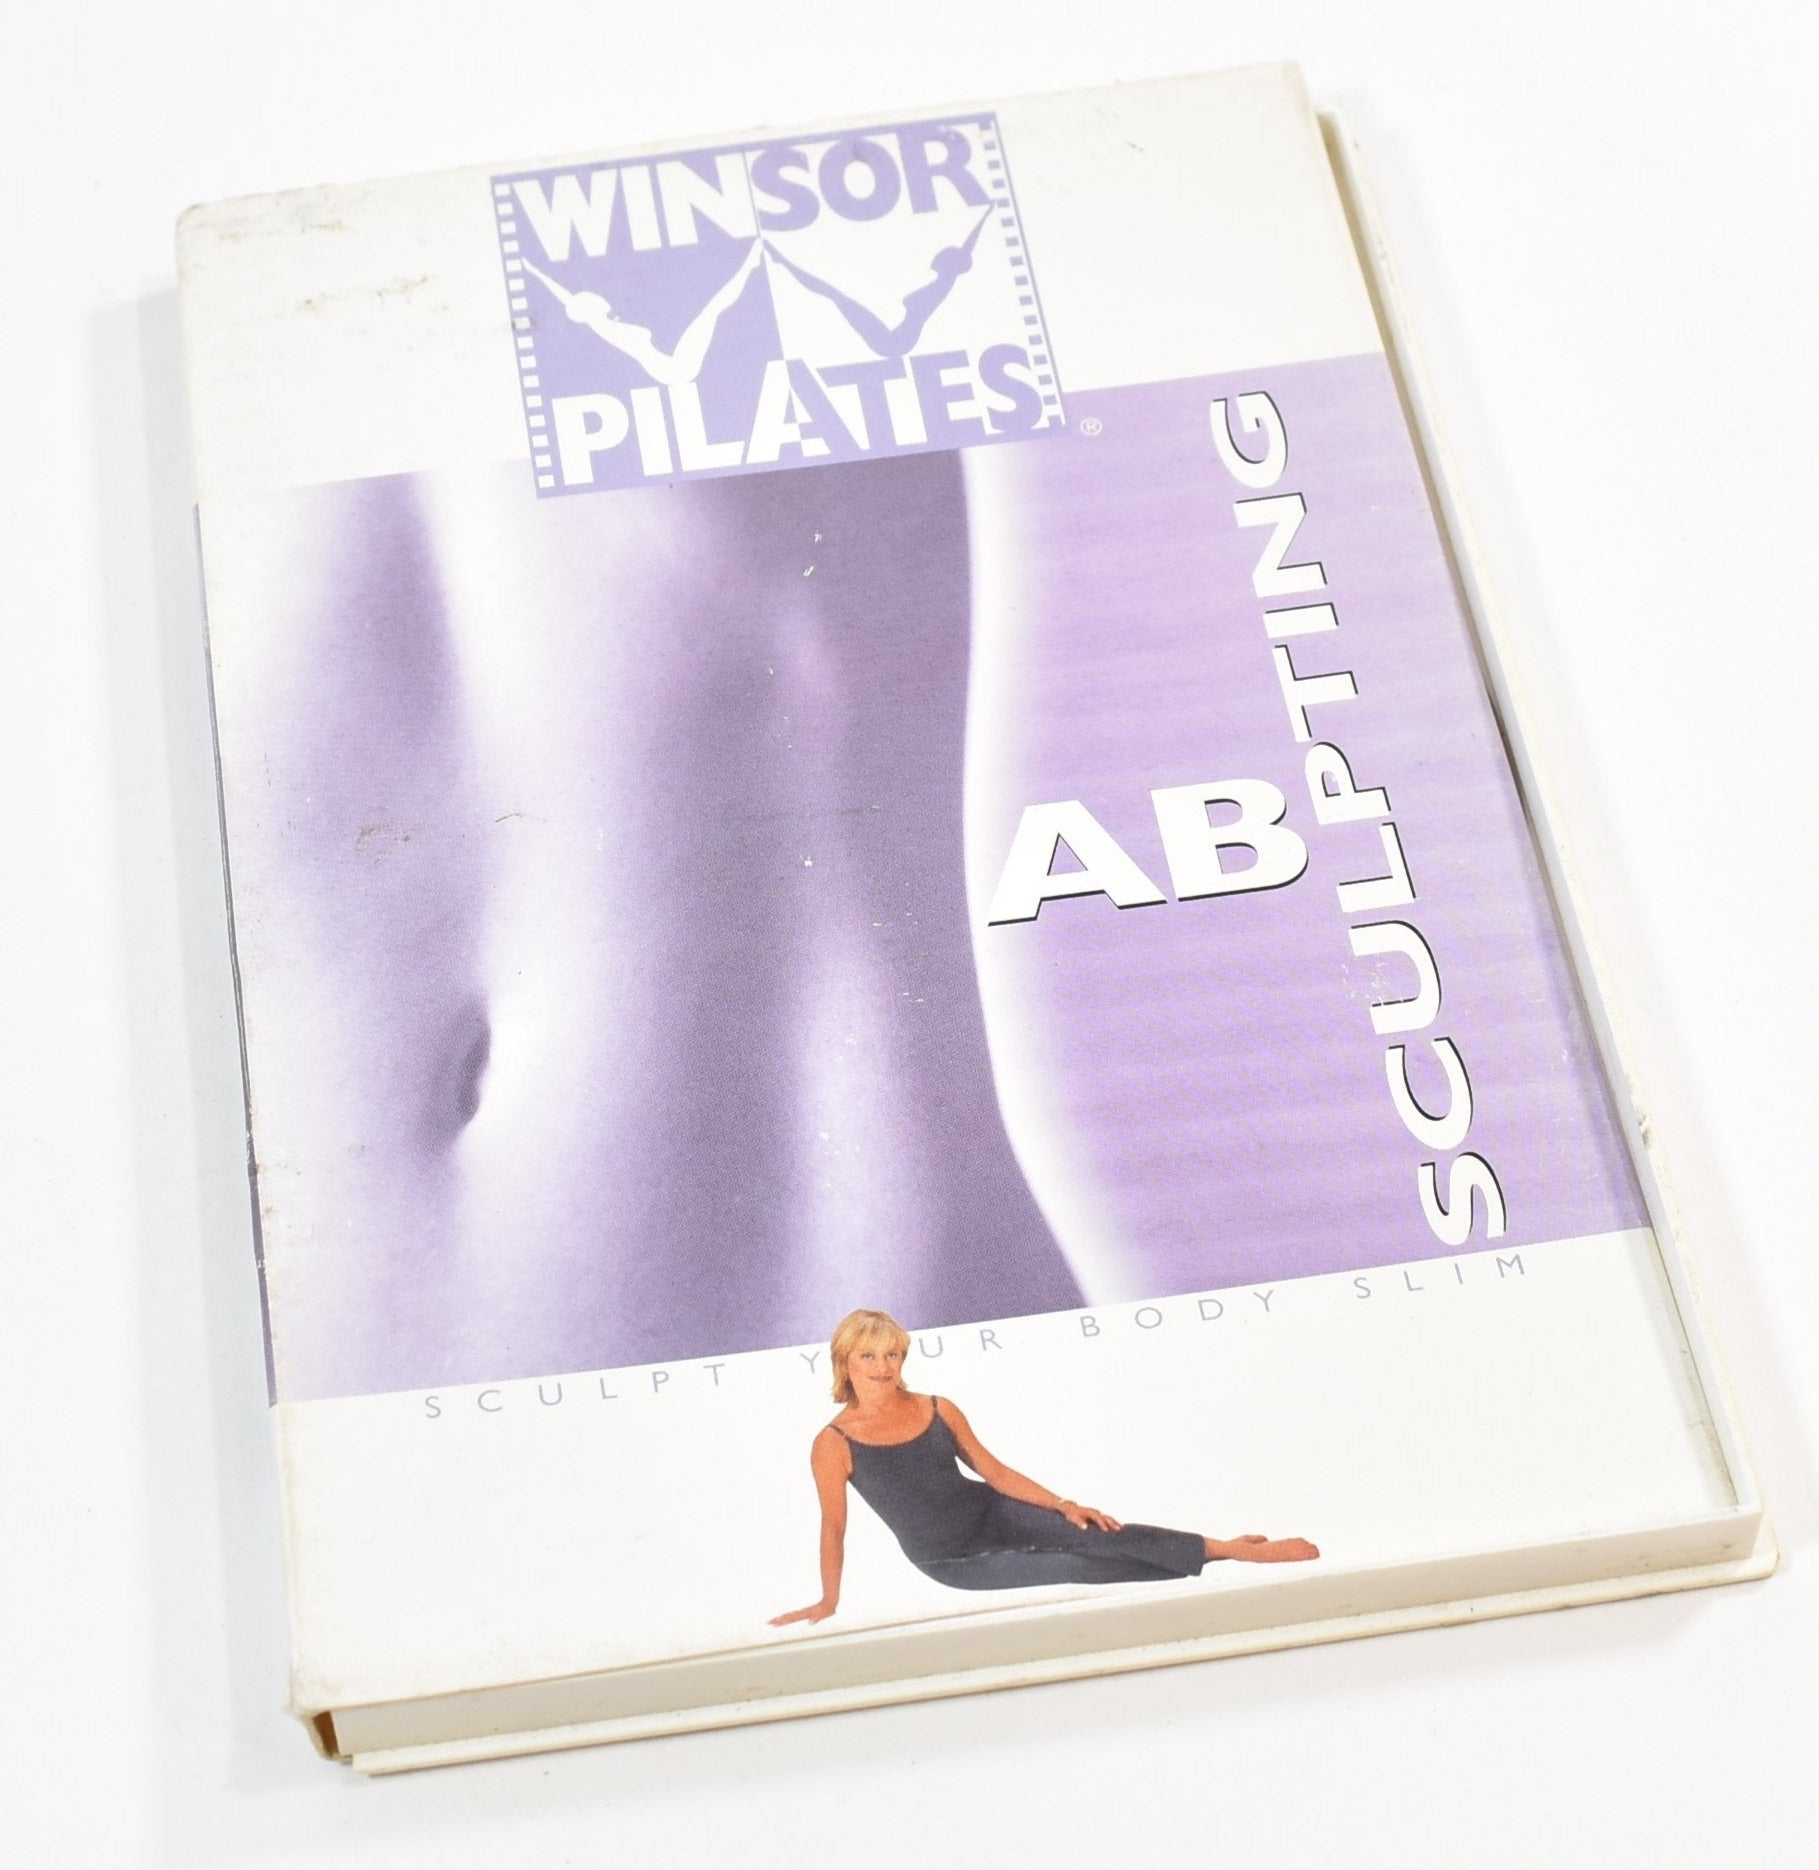 Winsor Pilates Ab Sculpting Body Slim DVD Work Out Used